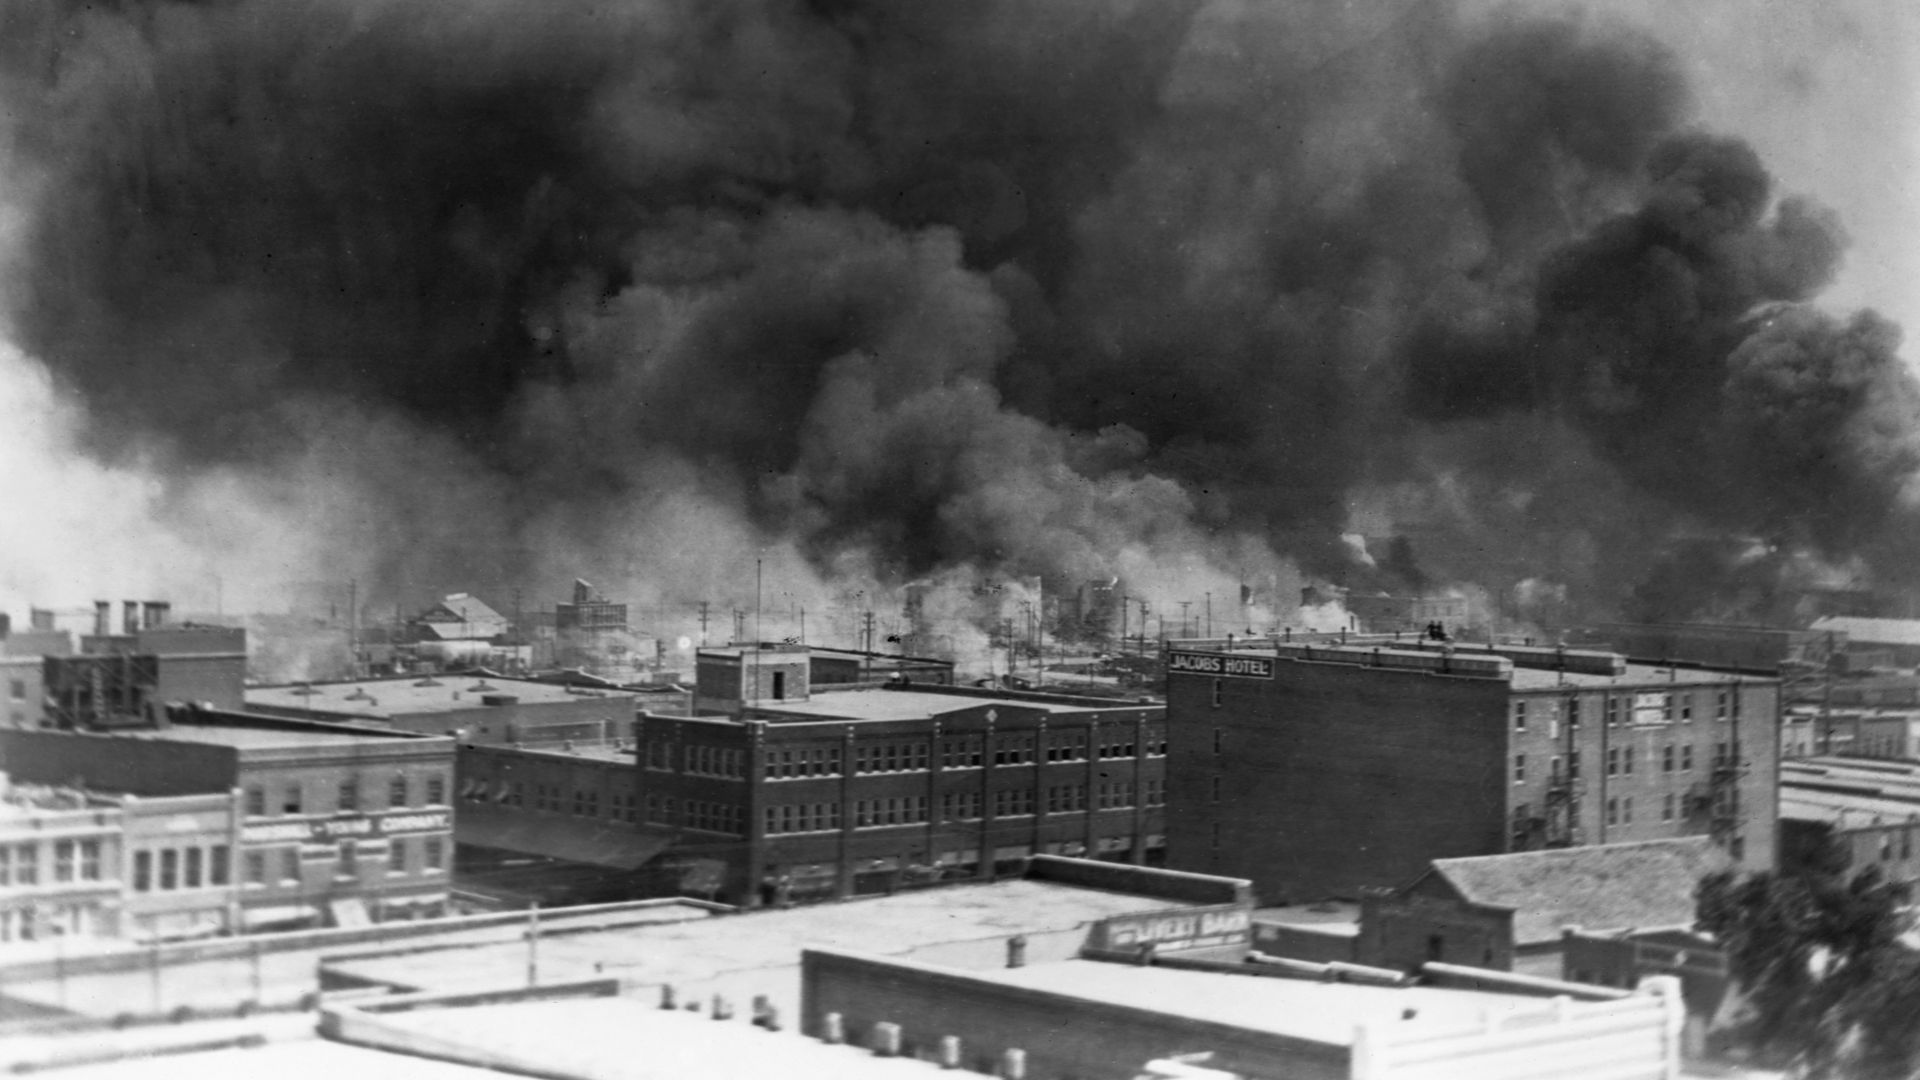  Smoke billows from fires during the Tulsa Race Massacre of 1921, in the Greenwood District of Tulsa, Oklahoma.